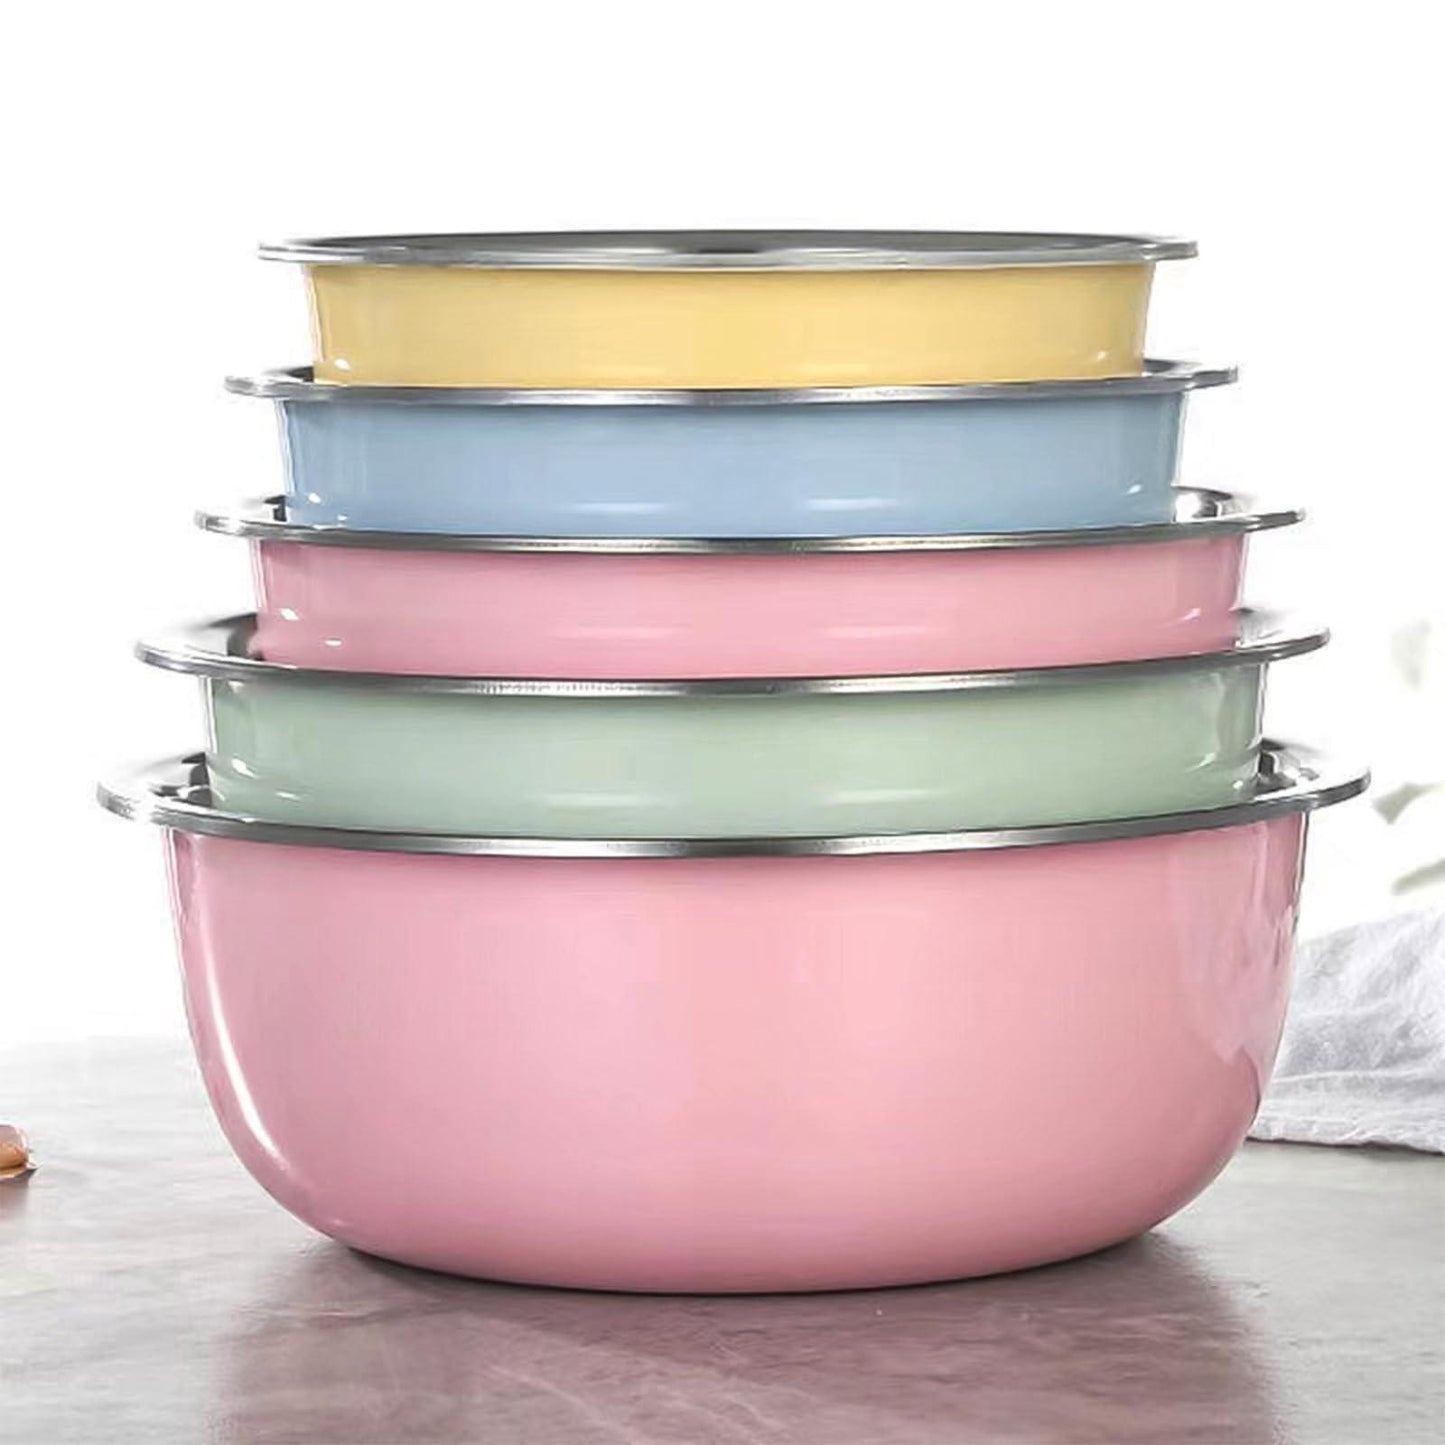 Gloserin Stainless Steel Mixing Bowls Set, 1.5/2/3/4/5 QT Home Metal Mixing Bowls Set of 5 for Refrigerator Kitchen Food Storage Organizers Polished Mirror Kitchen Bowls Large(Colored) - CookCave